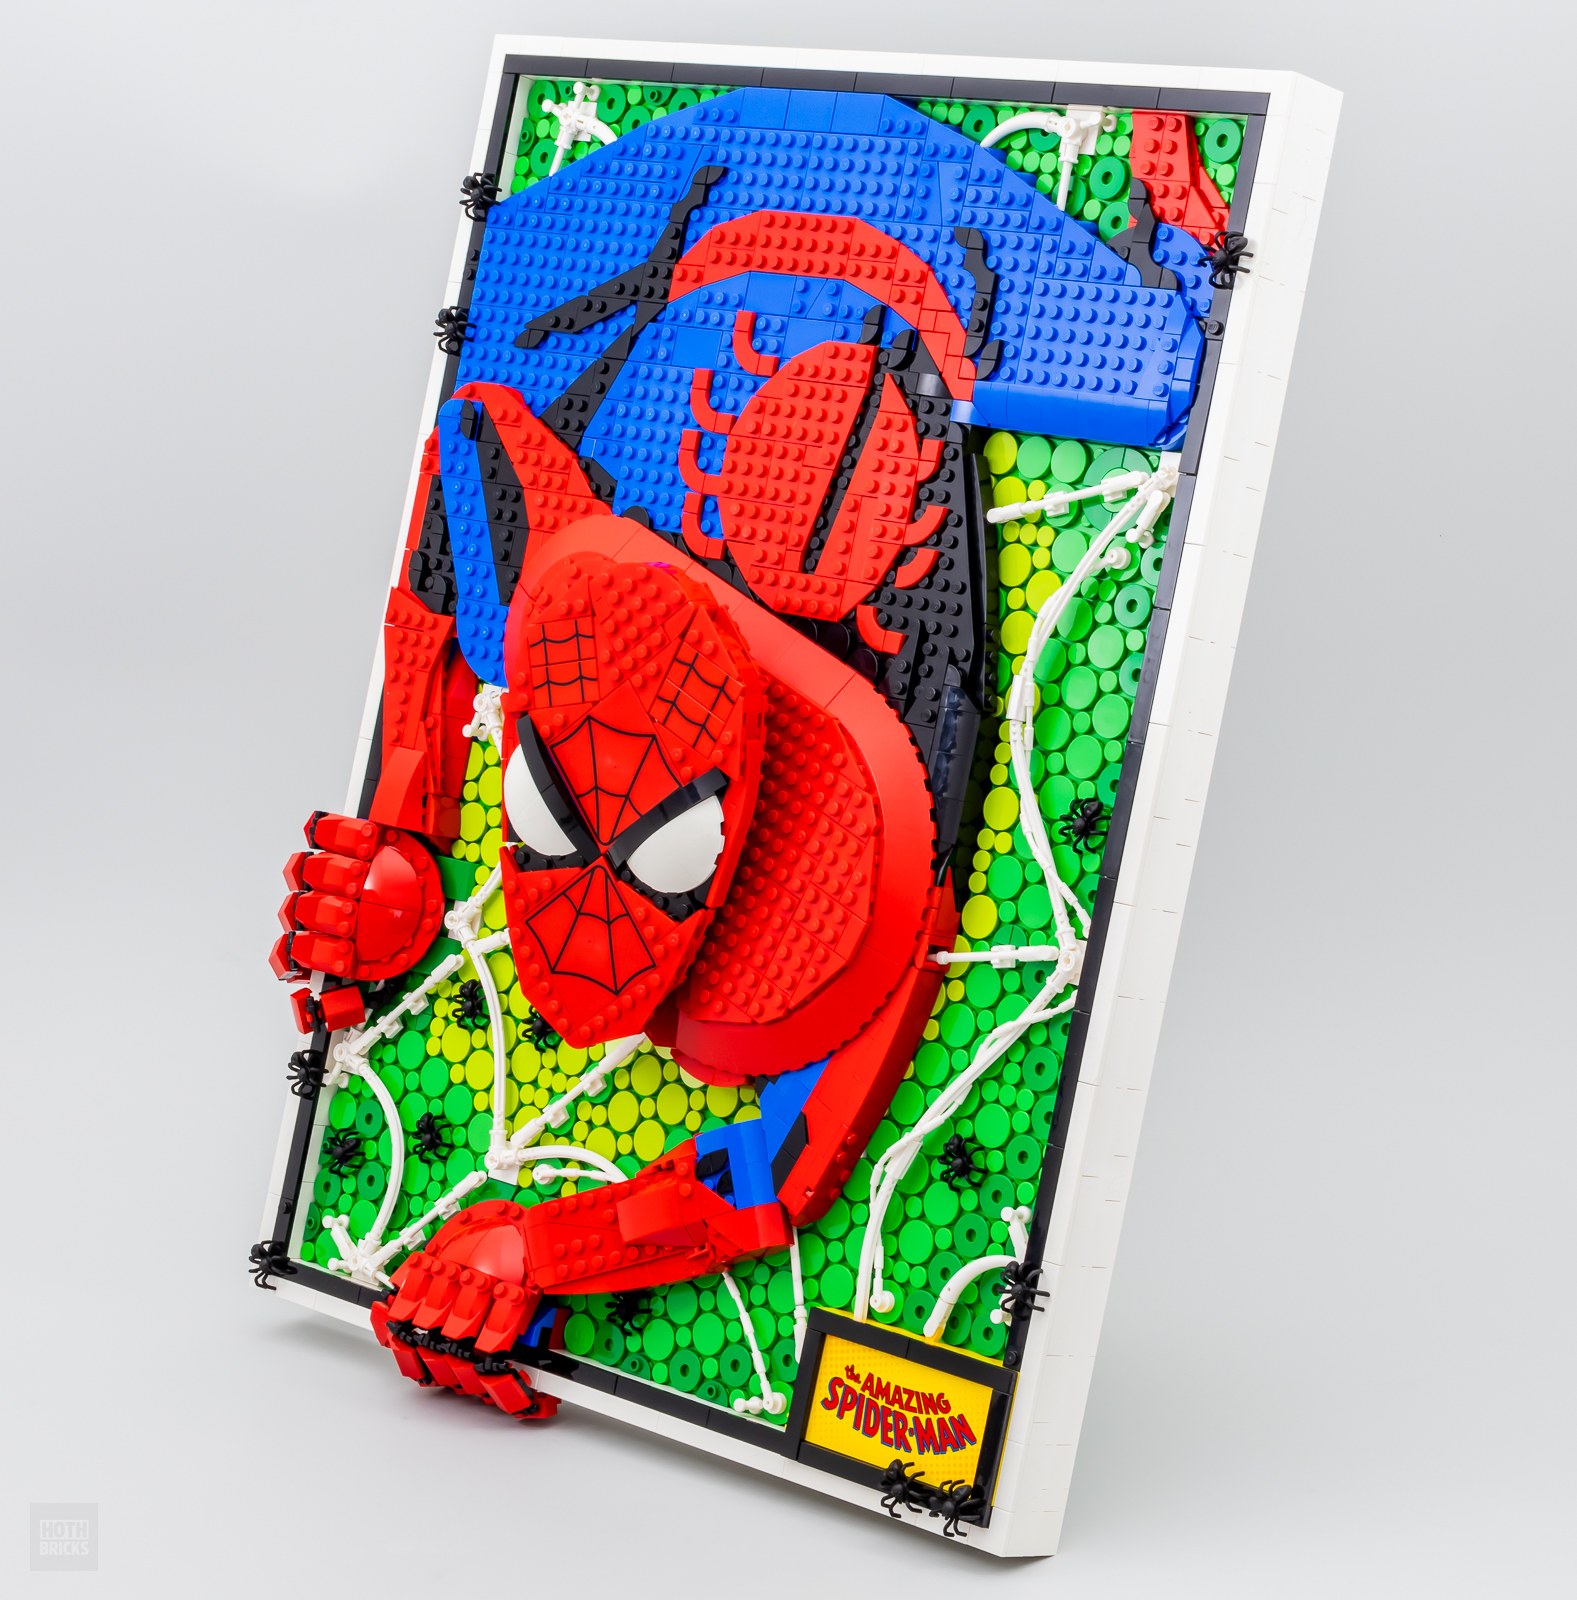 LEGO Art The Amazing Spider-Man (31209) Officially Revealed - The